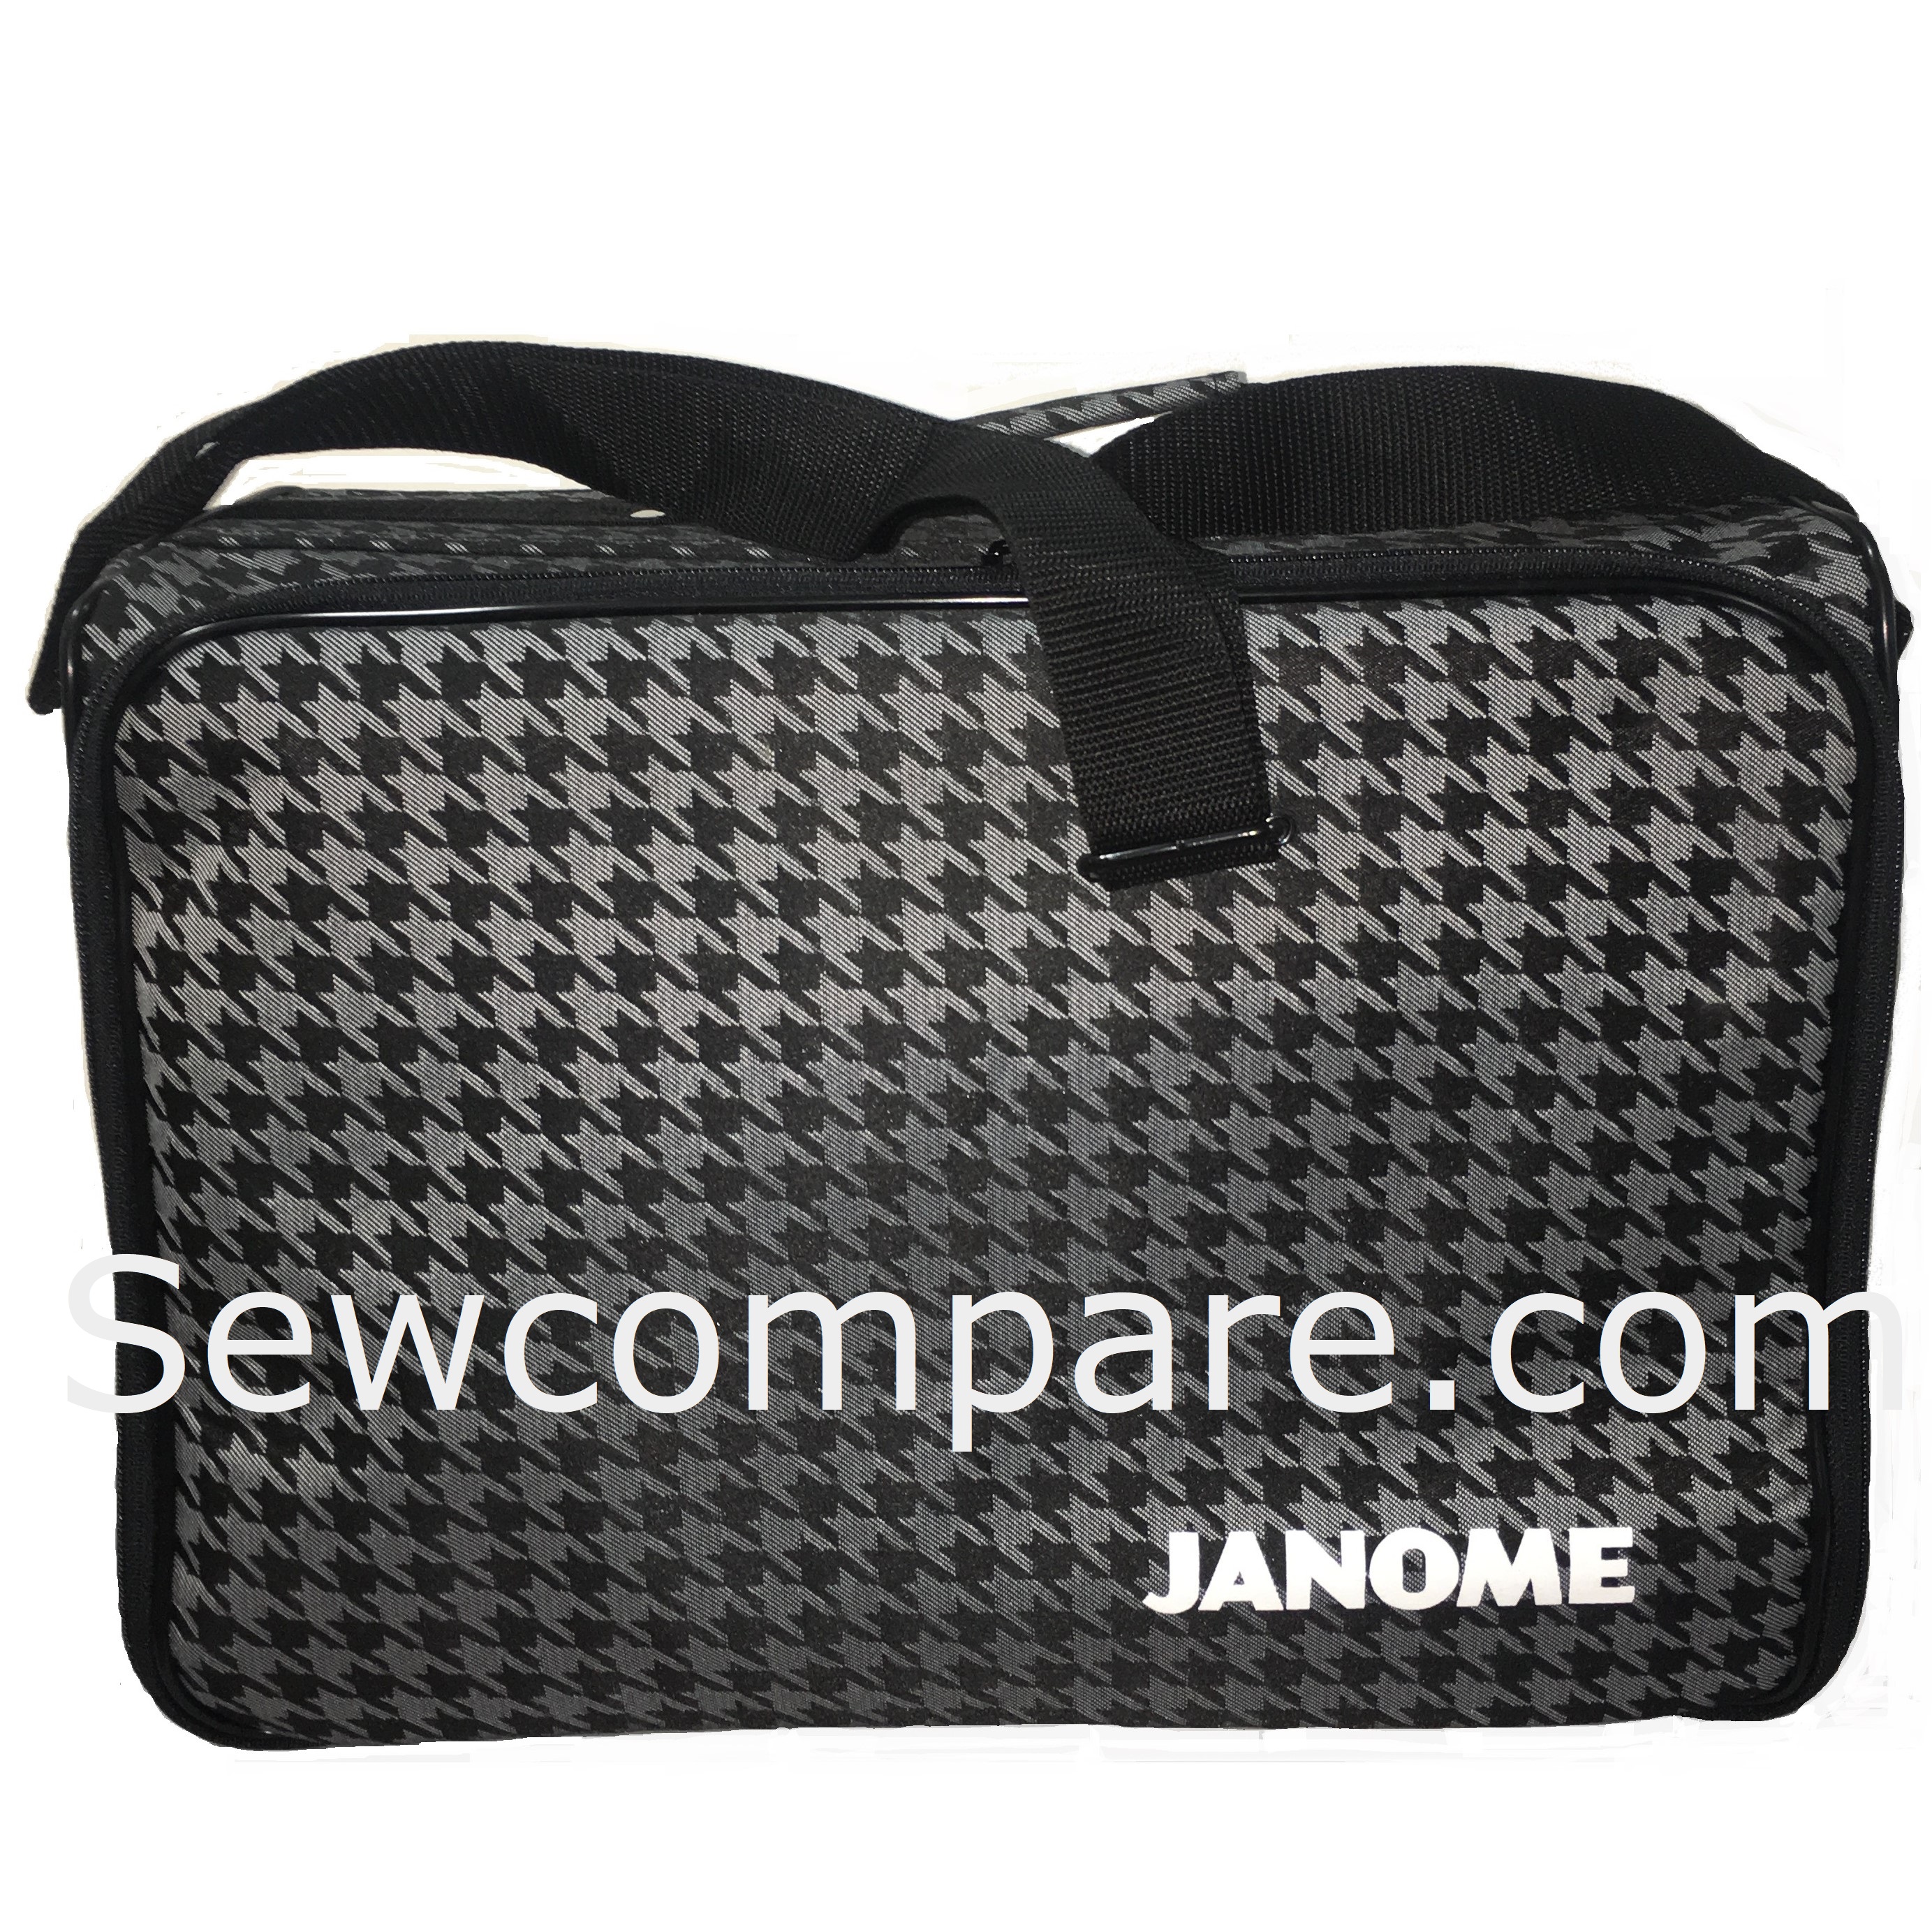 Janome Sewing Machine Tote Bag in Black Floral with Floral Pattern